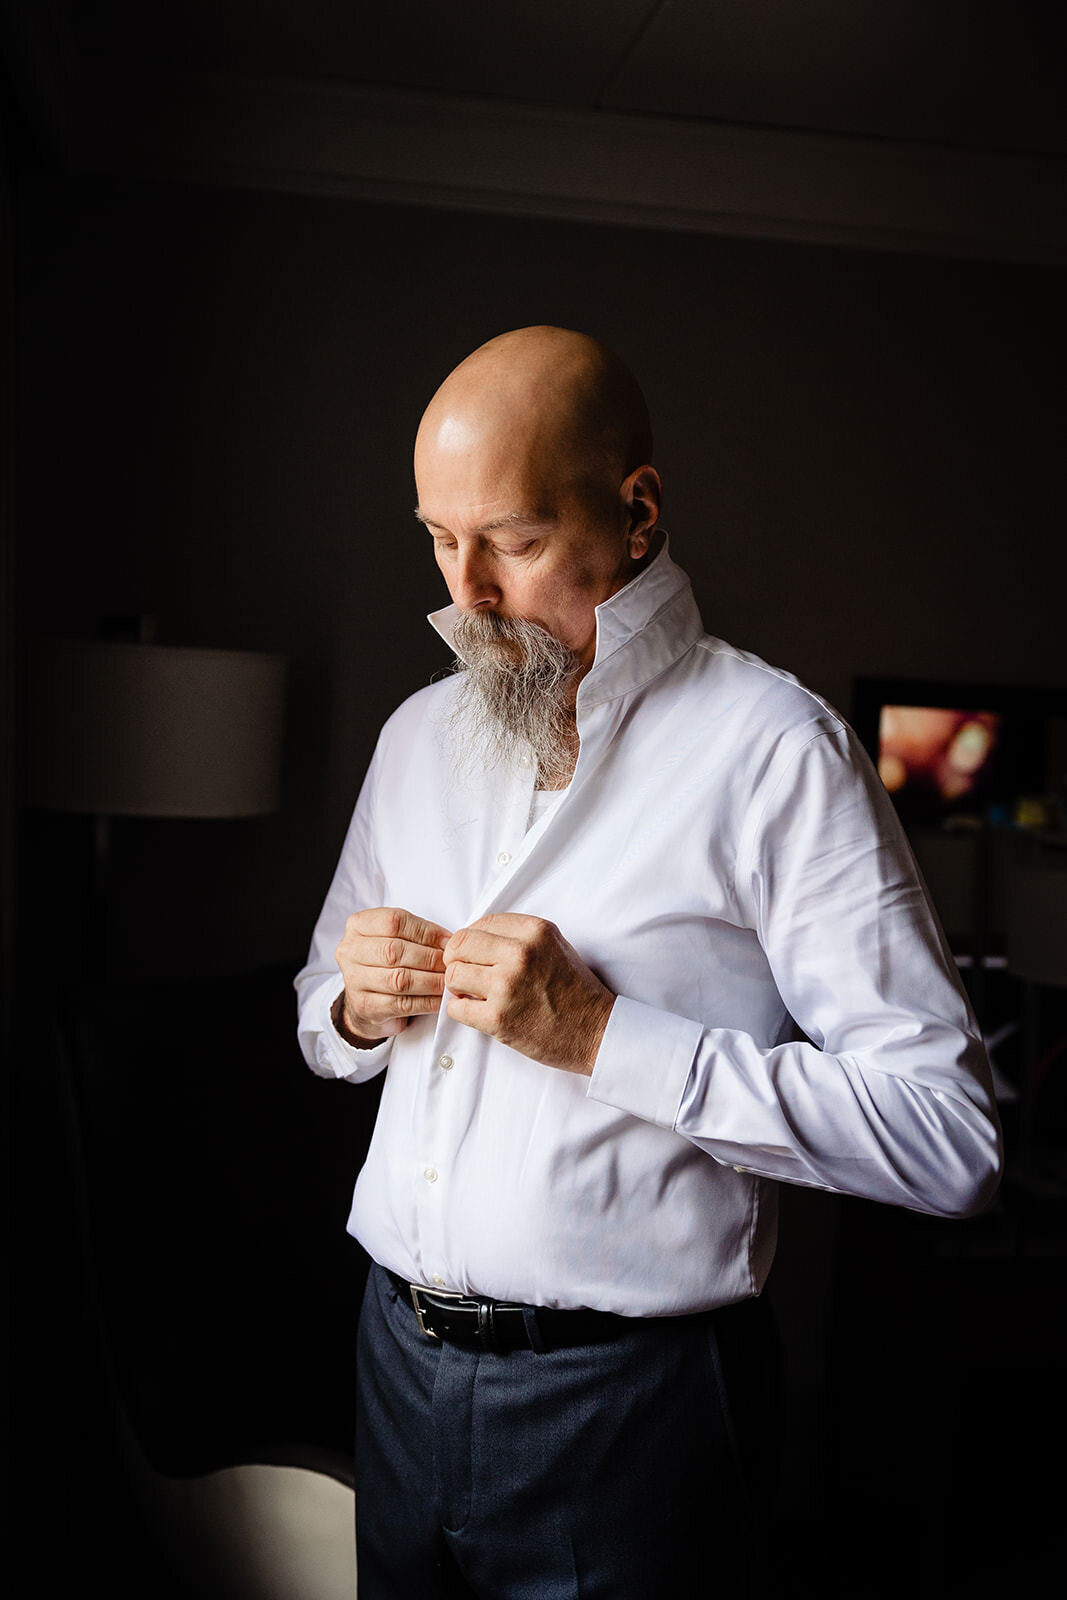 A man with a bald head and a full white beard buttoning up his white shirt, preparing for a formal event